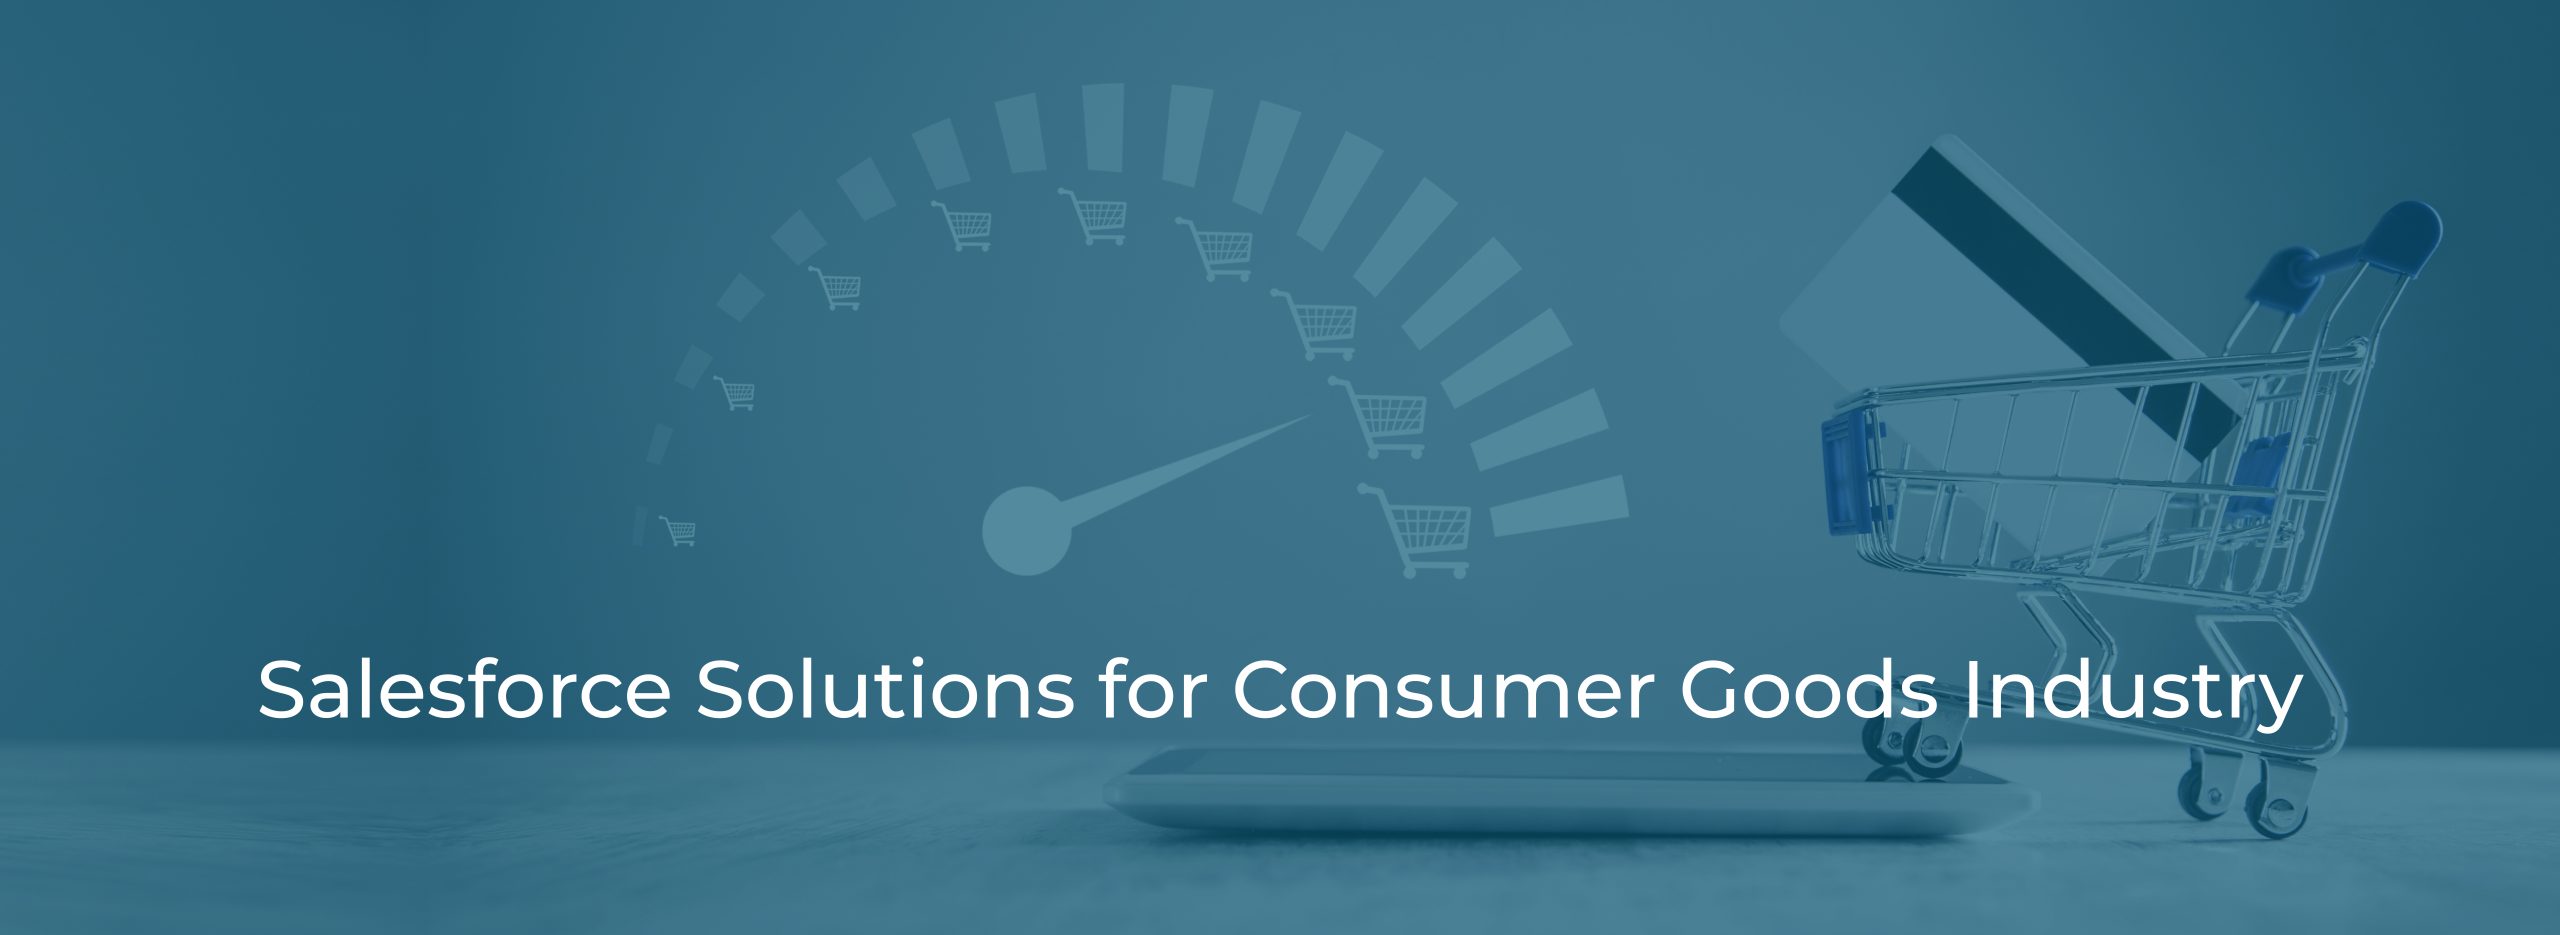 Salesforce Solutions for Consumer Goods Industry